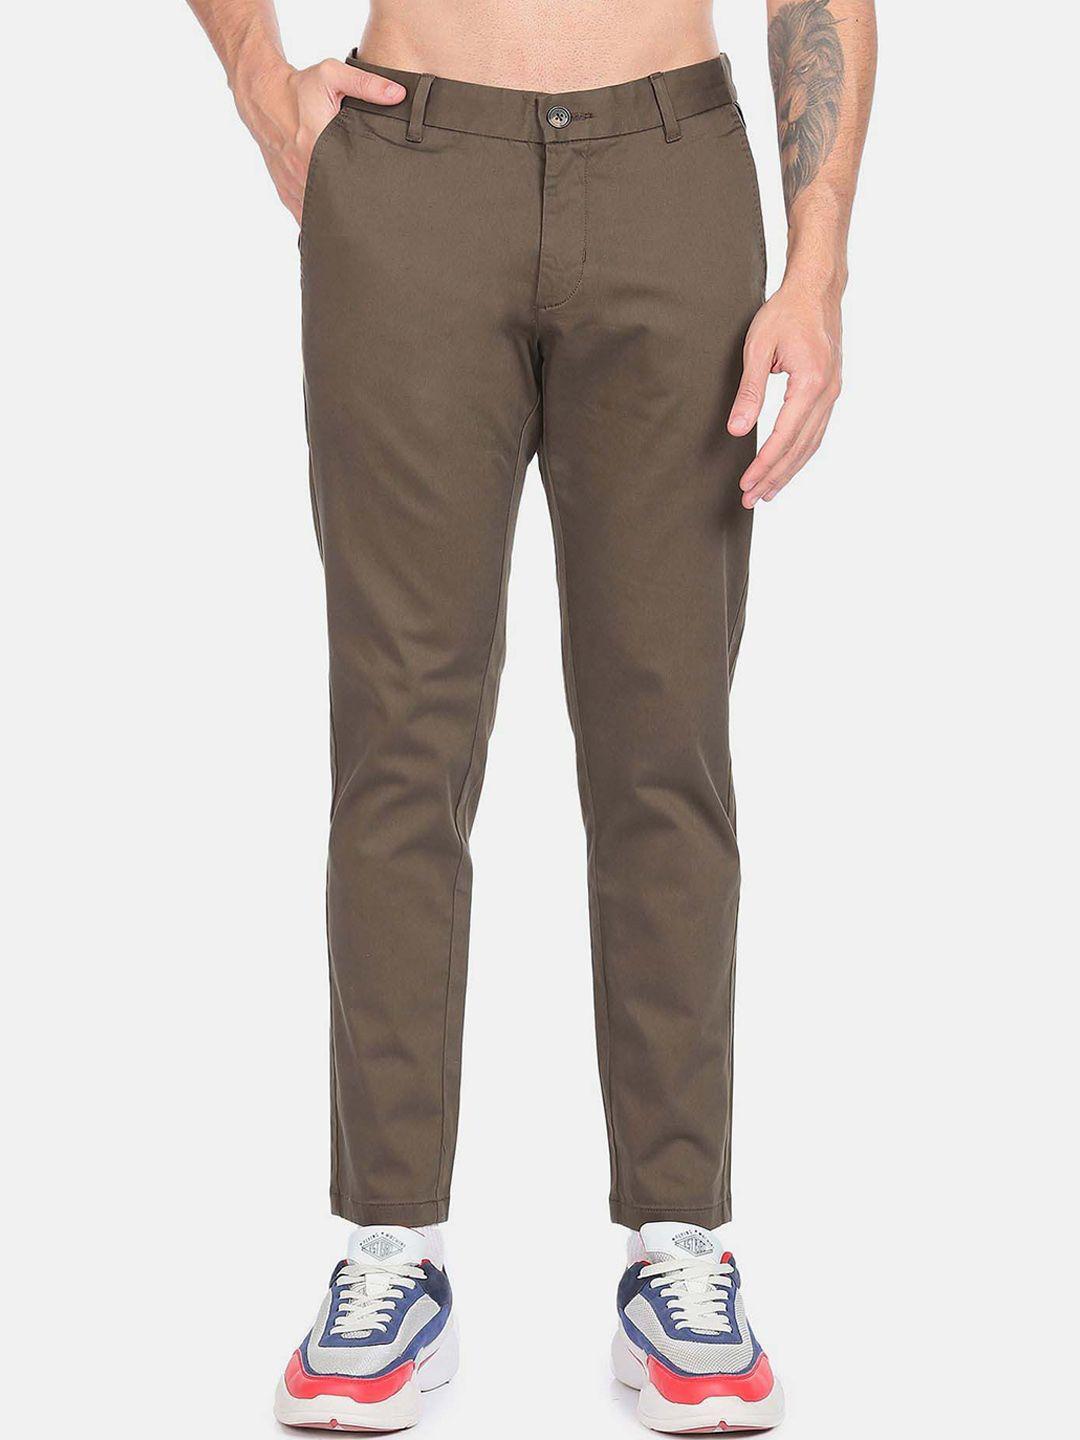 flying-machine-men-slim-fit-mid-rise-chinos-trousers